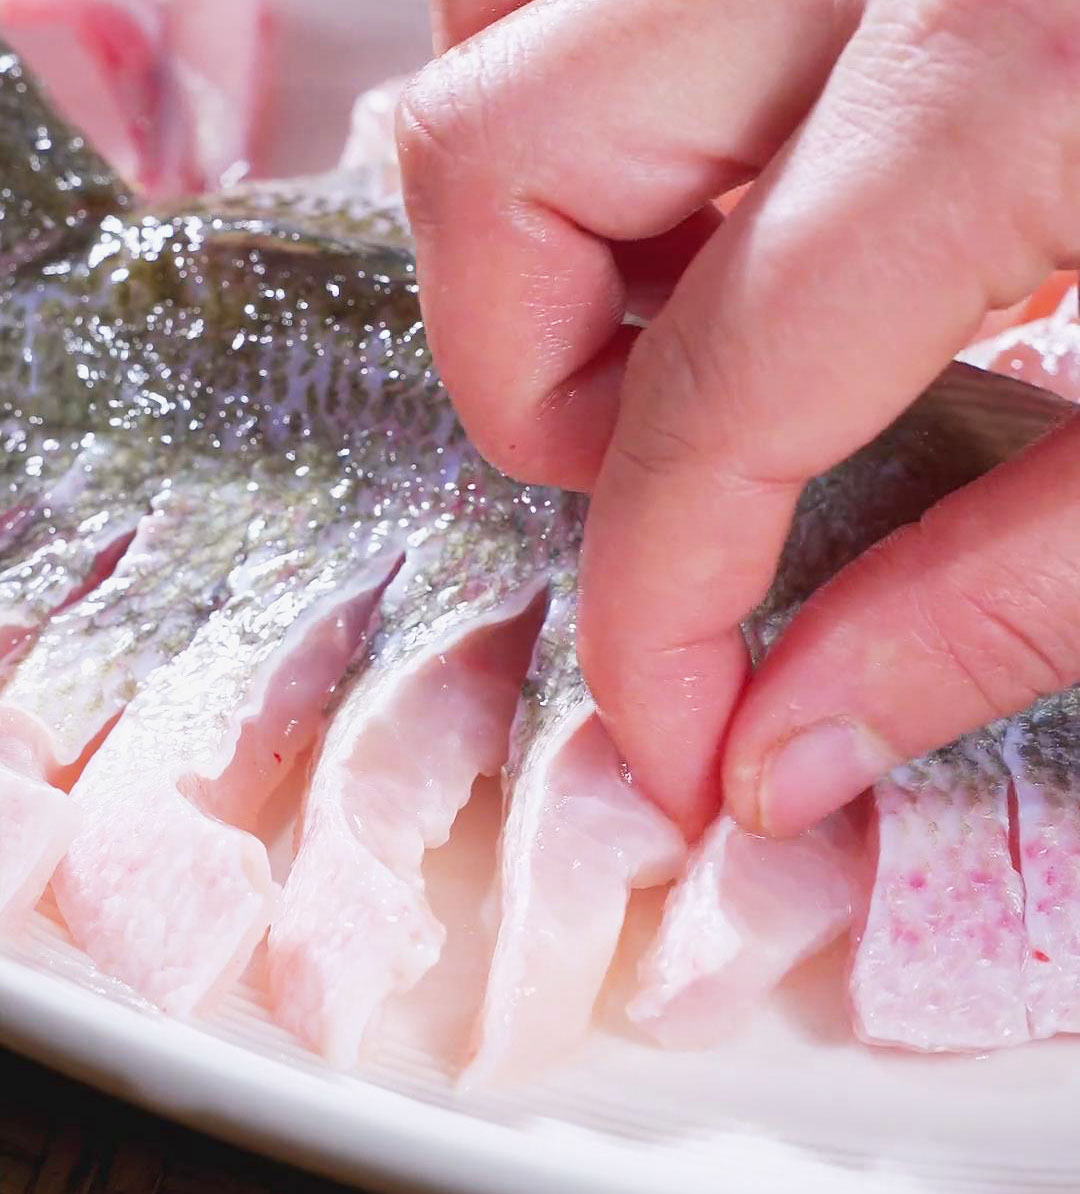 Carefully flip each strip of the sliced belly to let the flesh side face the top